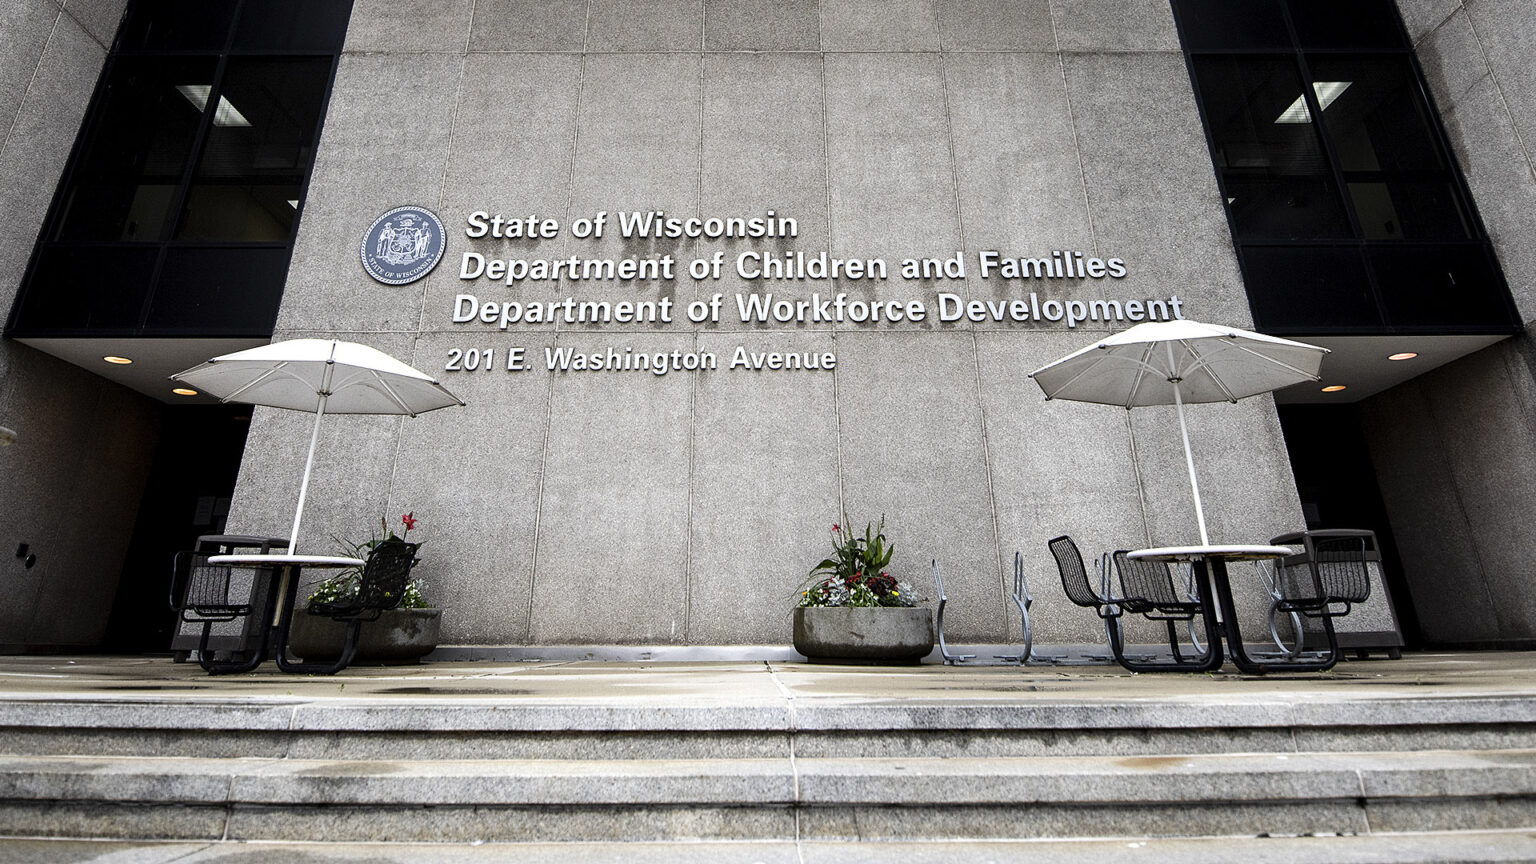 Two outdoor metal tables with attached chairs and umbrellas stand on the concrete patio in front of a building with poured concrete masonry, with the Wisconsin state seal affixed to the wall next to a letter sign reading State of Wisconsin, Department of Children and Families and Department of Workforce Development.